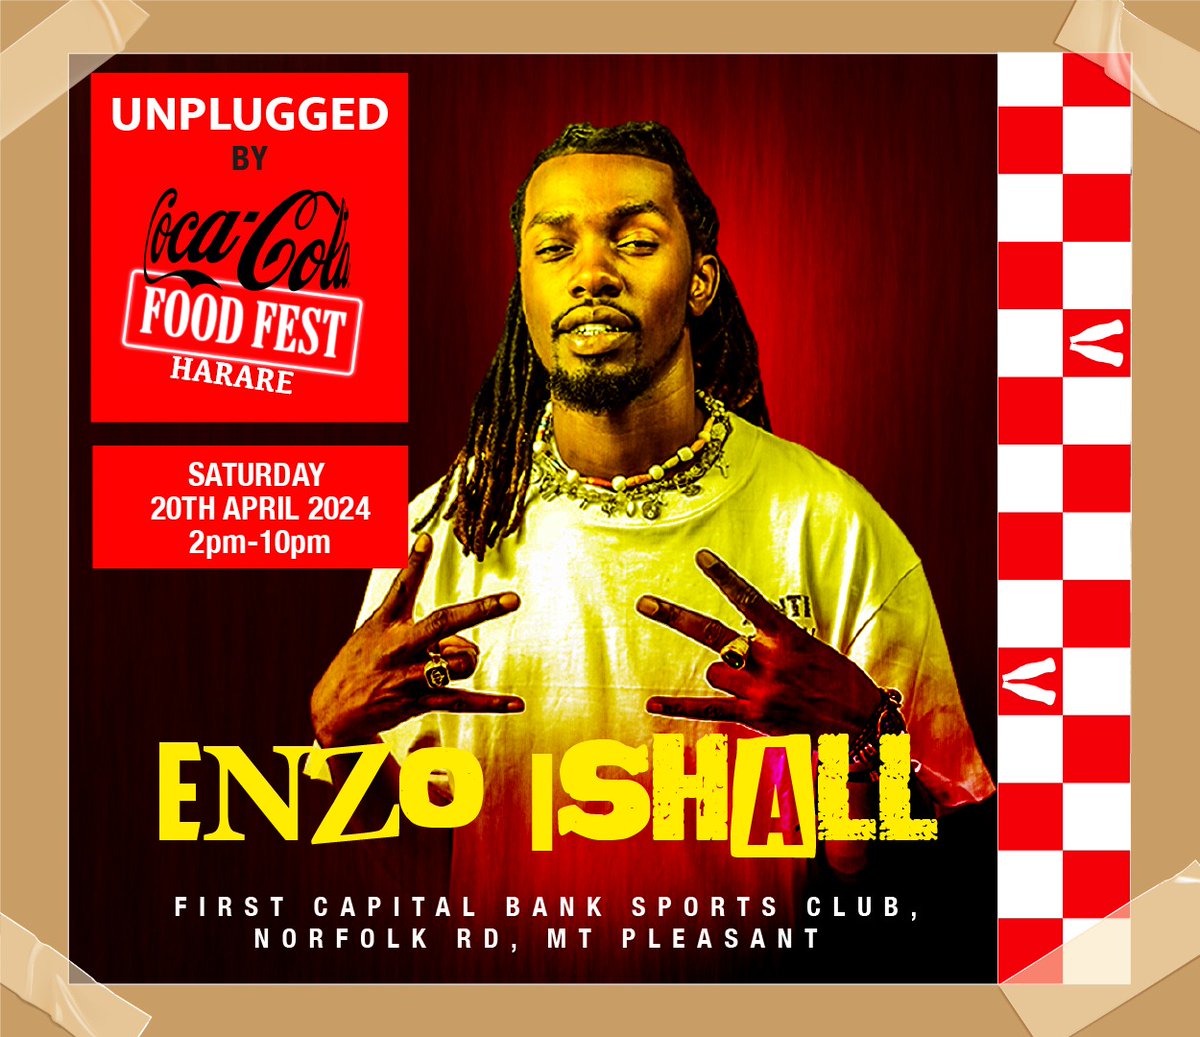 We're bringing the vibes back with one of our faves! Chiraaaaa!!!! @enzoishallmusic is coming through to celebrate this epic 10th anniversary with us. Now you know we're not here to play!  #UnpluggedxCokeFoodFestival #MusicMealsMemories #Unpluggedat10 #BringItBack